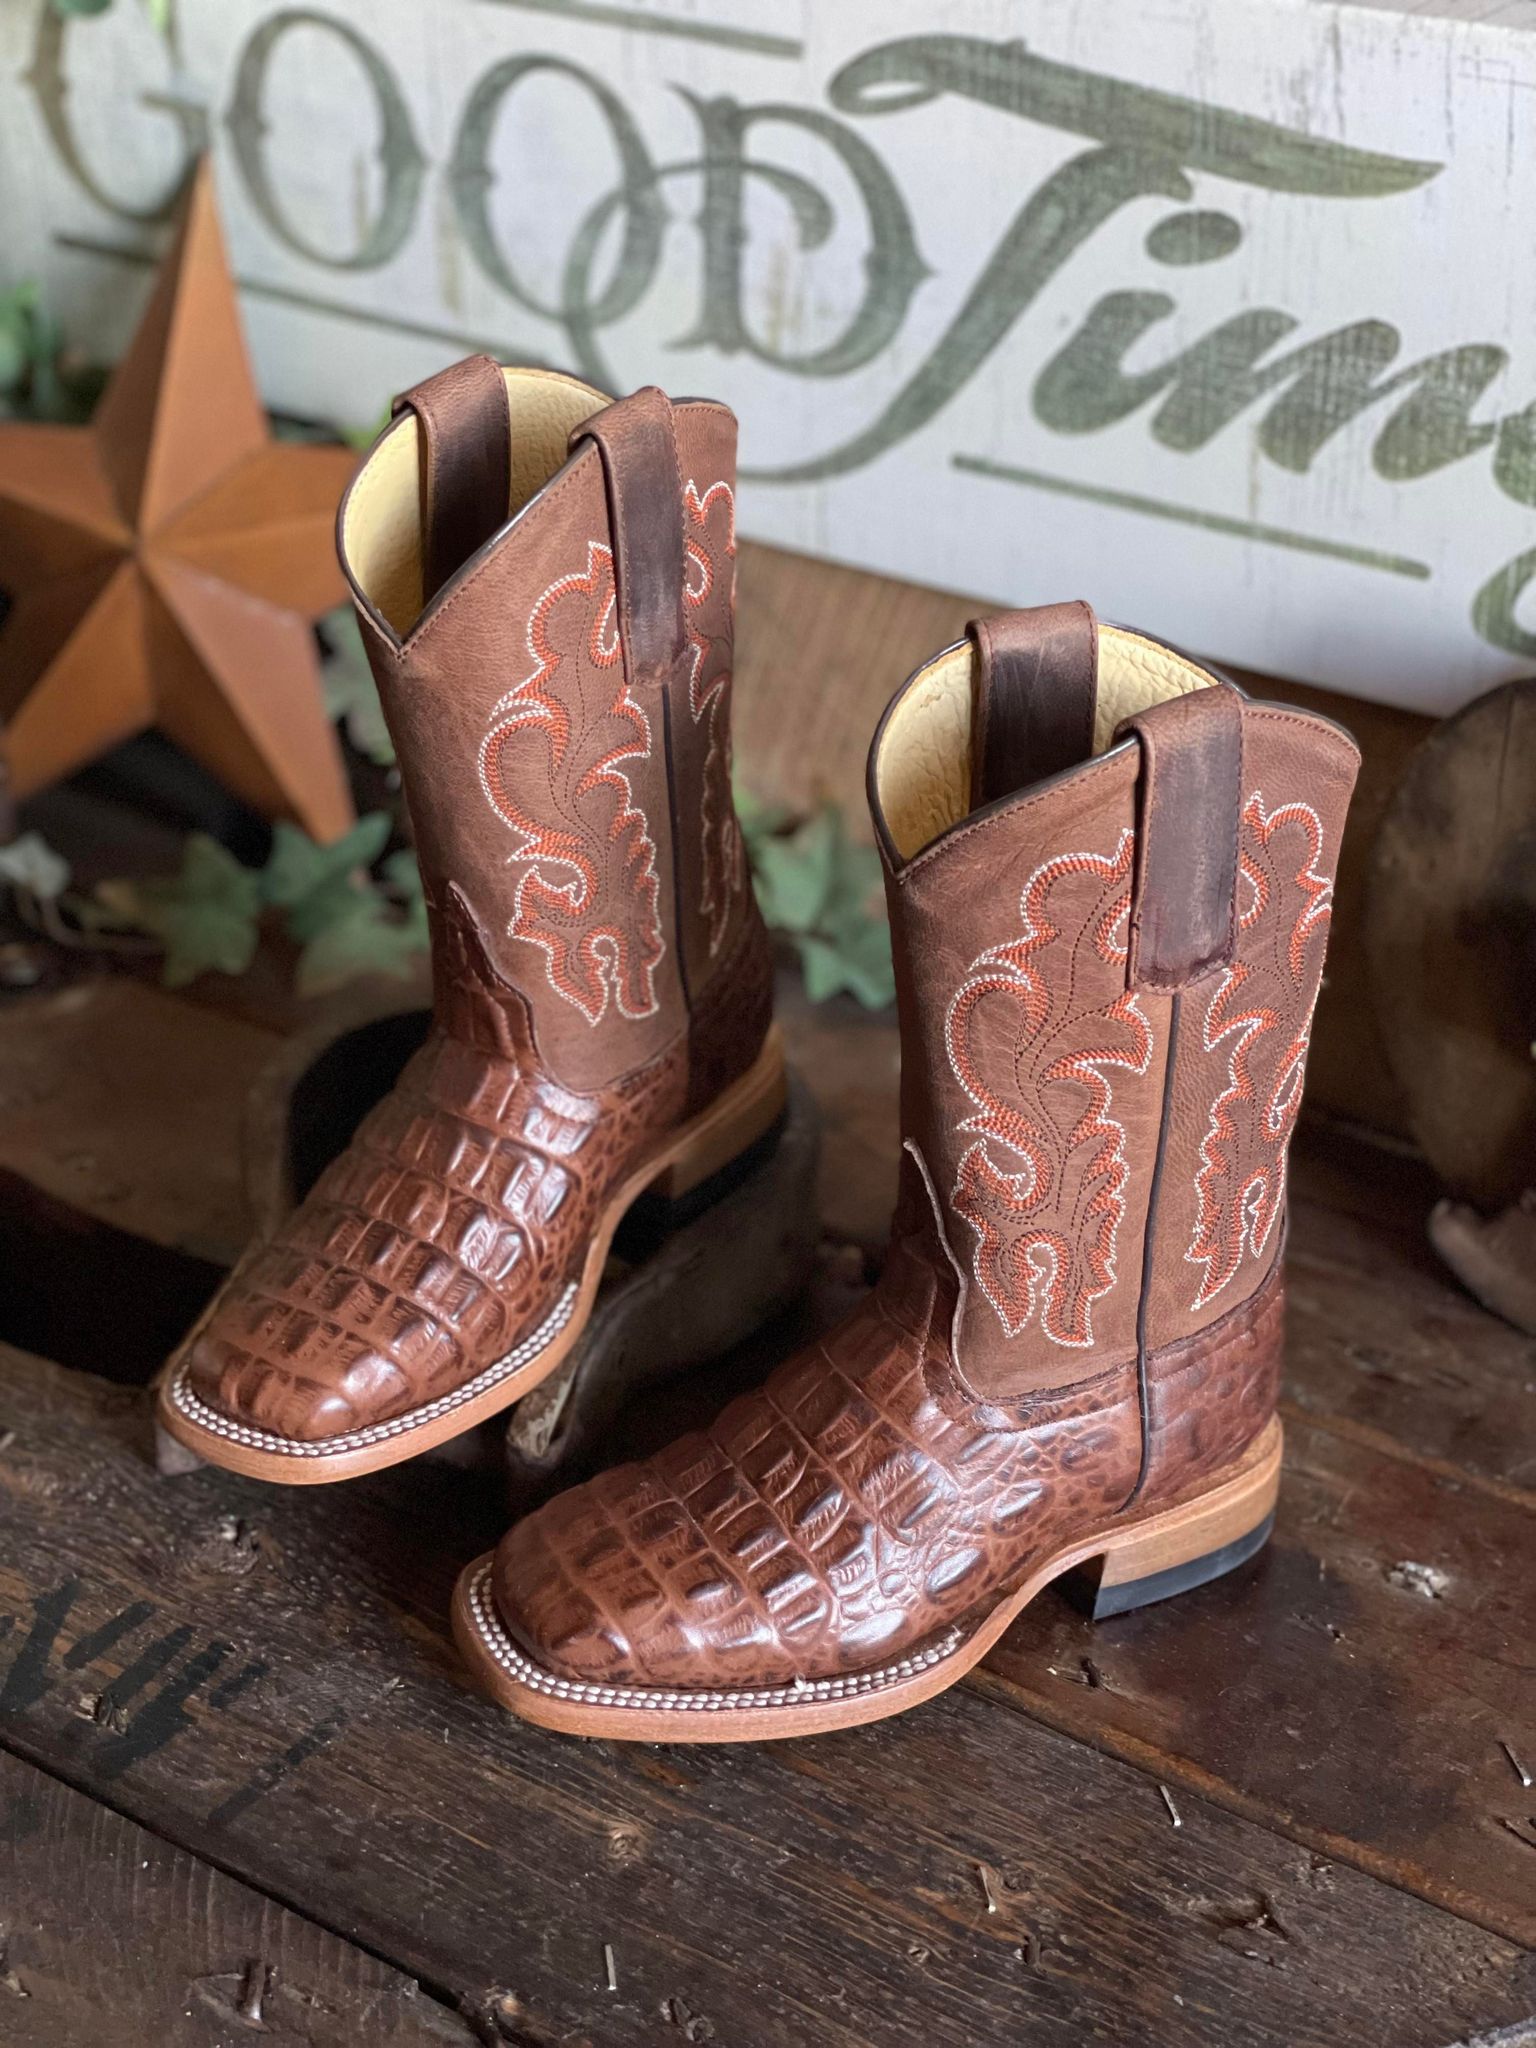 Kids AB Chocolate Nile Croc Print Boots-Kids Boots-Anderson Bean-Lucky J Boots & More, Women's, Men's, & Kids Western Store Located in Carthage, MO